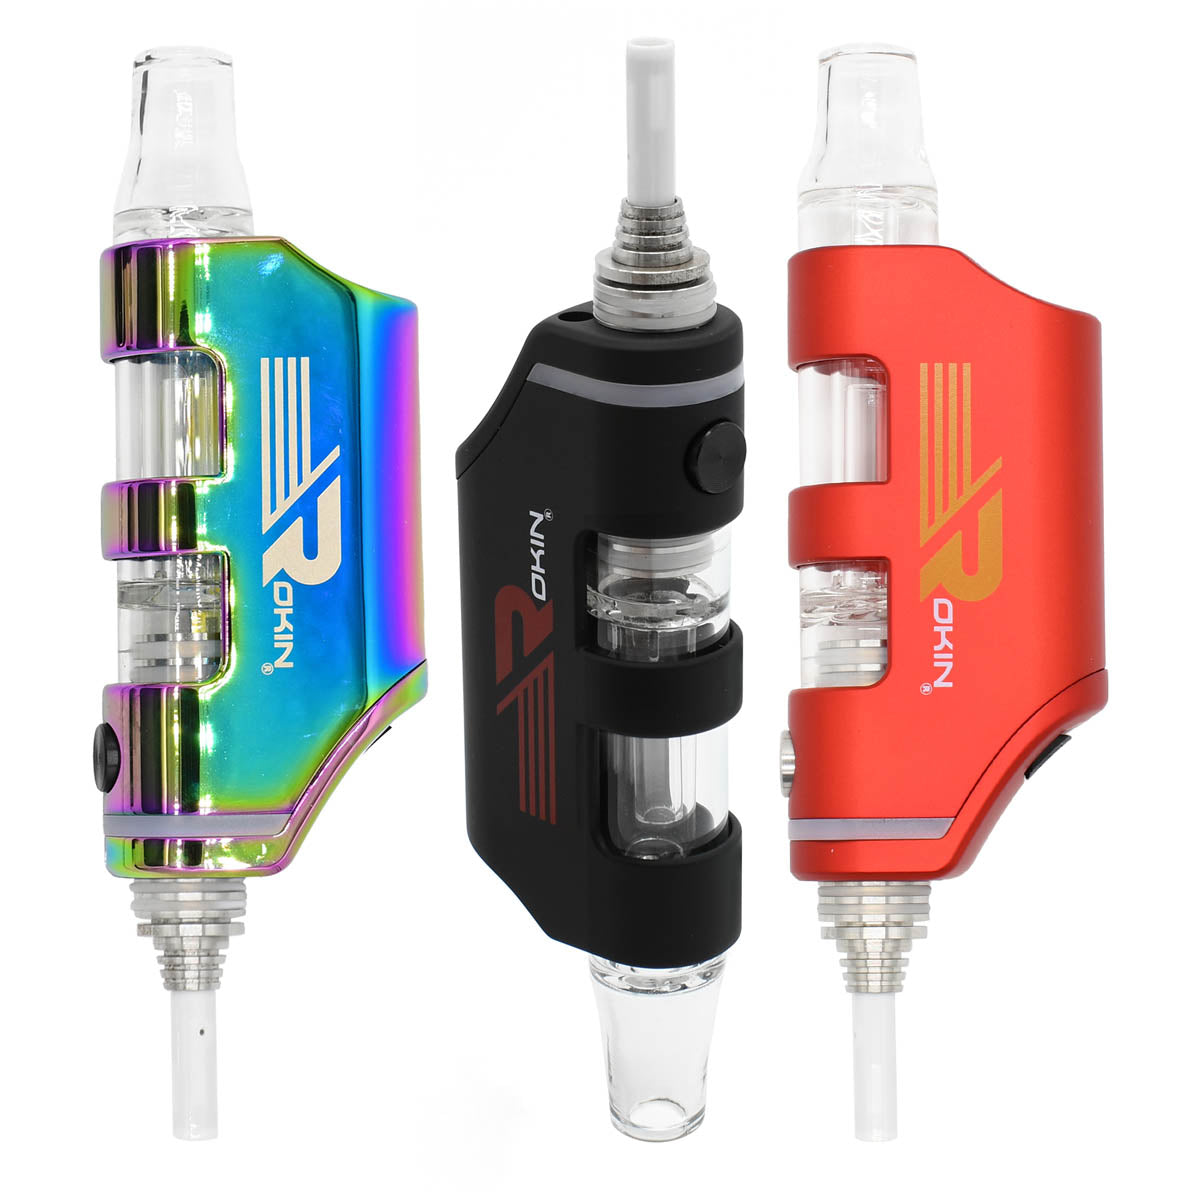 Rokin Stinger Nectar Collector Colors: Multicolor, Black and Red